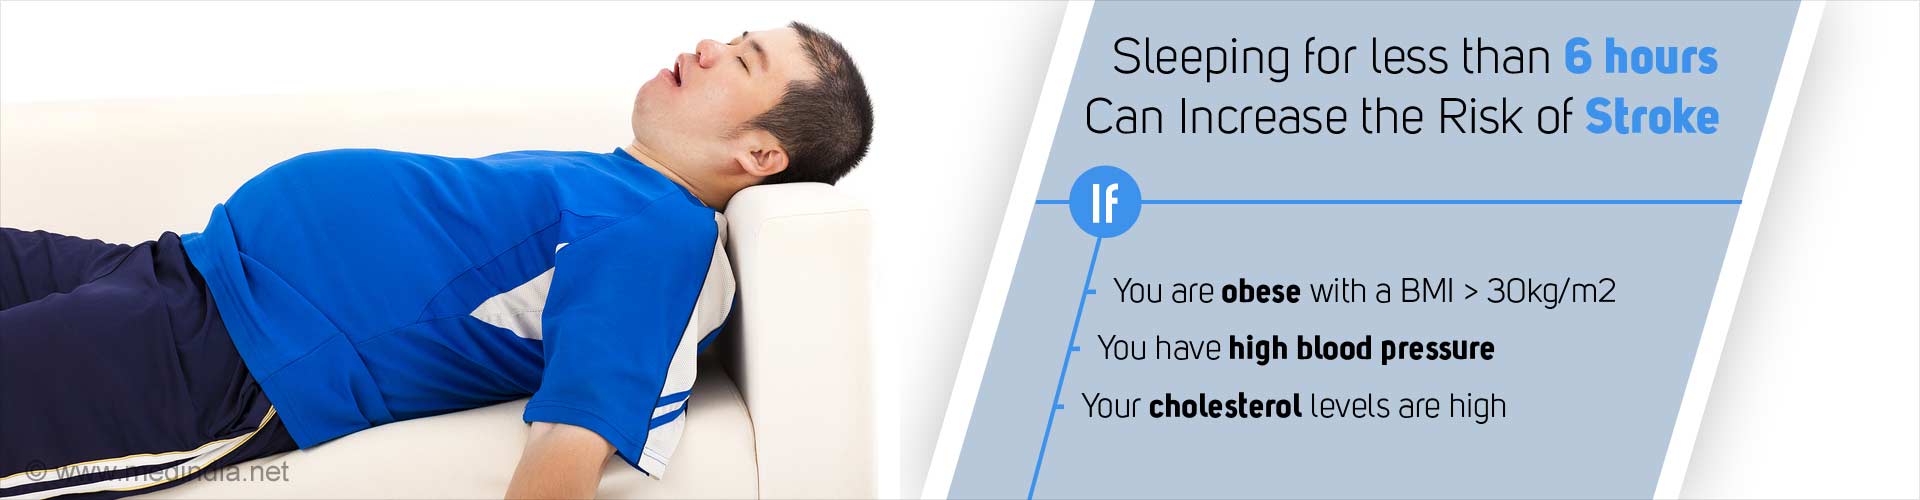 Sleeping for less than 6 hours can increase the risk of stroke 
- If you are obese with a BMI > 30kg/m2
- If you have high blood pressure
- If your cholesterol levels are high